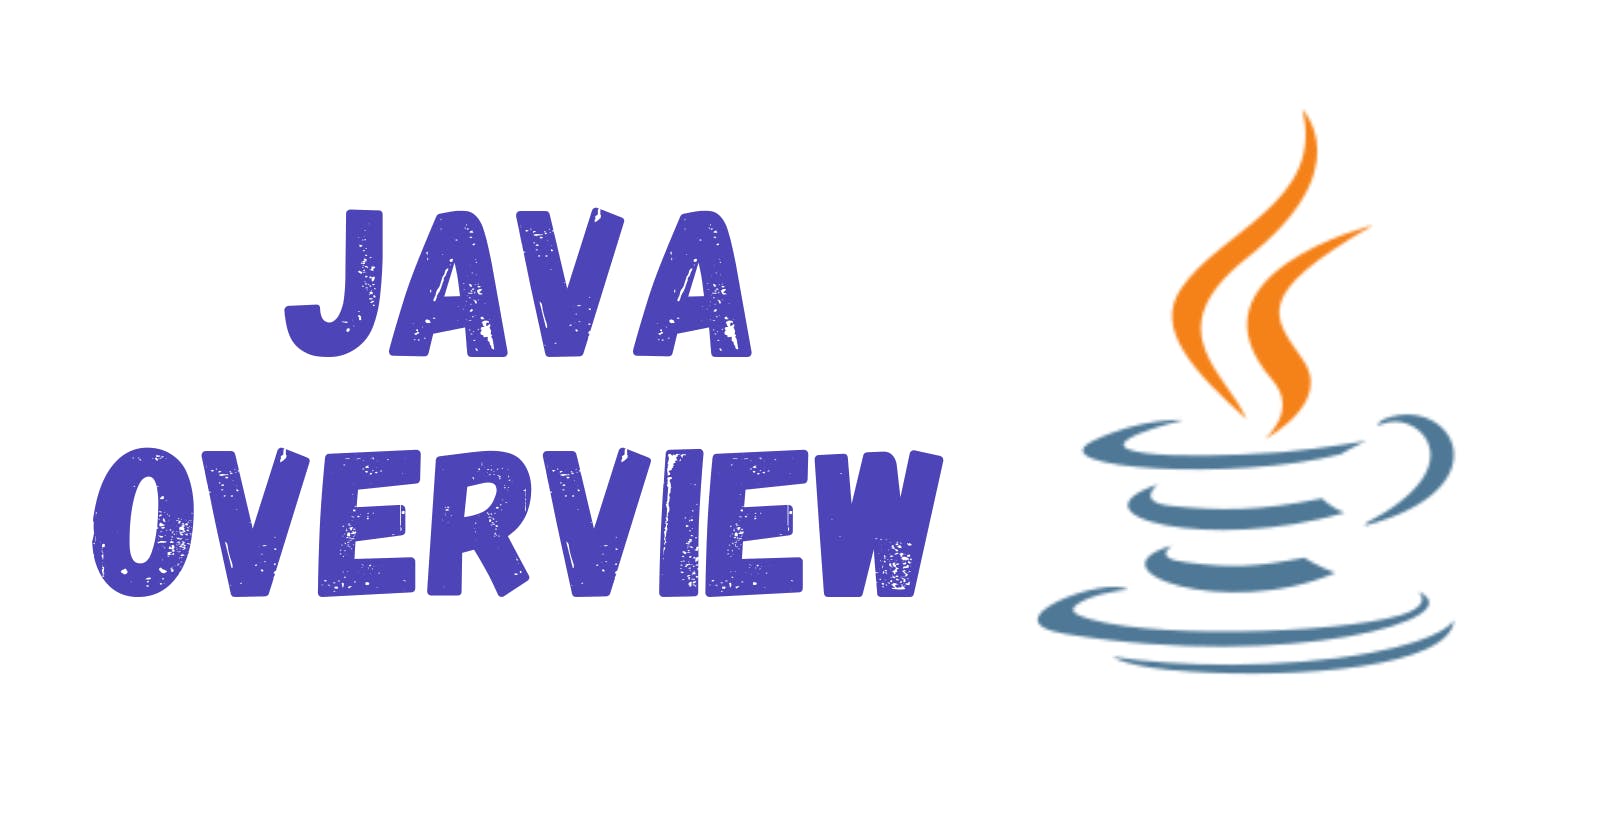 Java - An Overview: History, Applications, and Pros and Cons